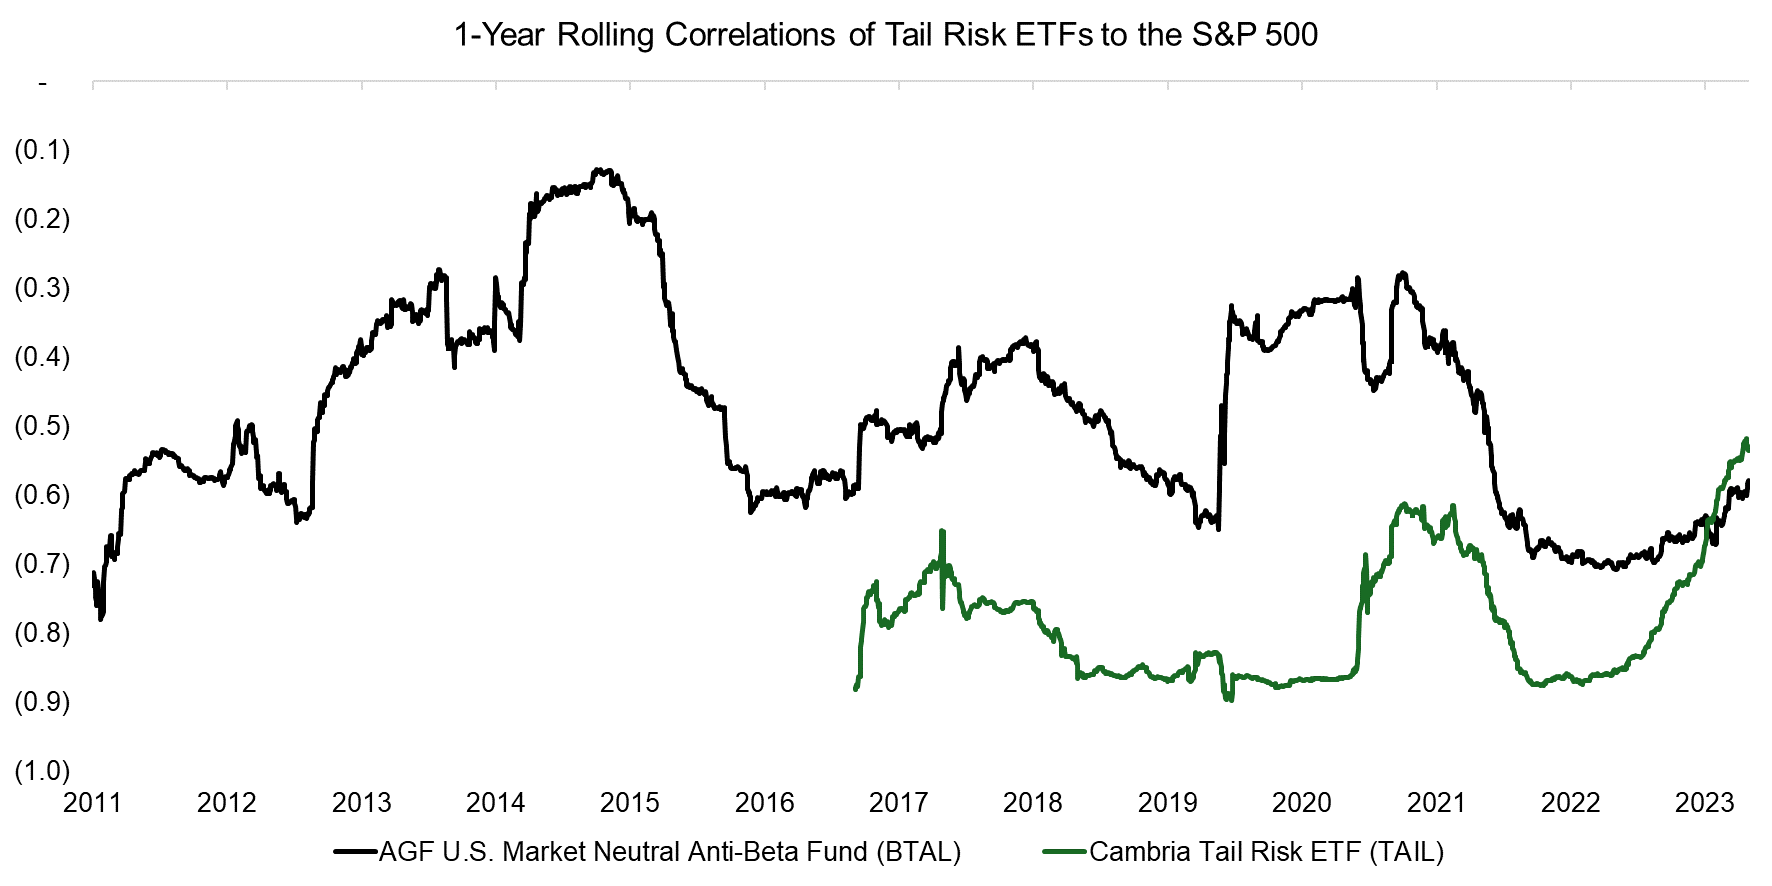 1-Year Rolling Correlations of Tail Risk ETFs to the S&P 500